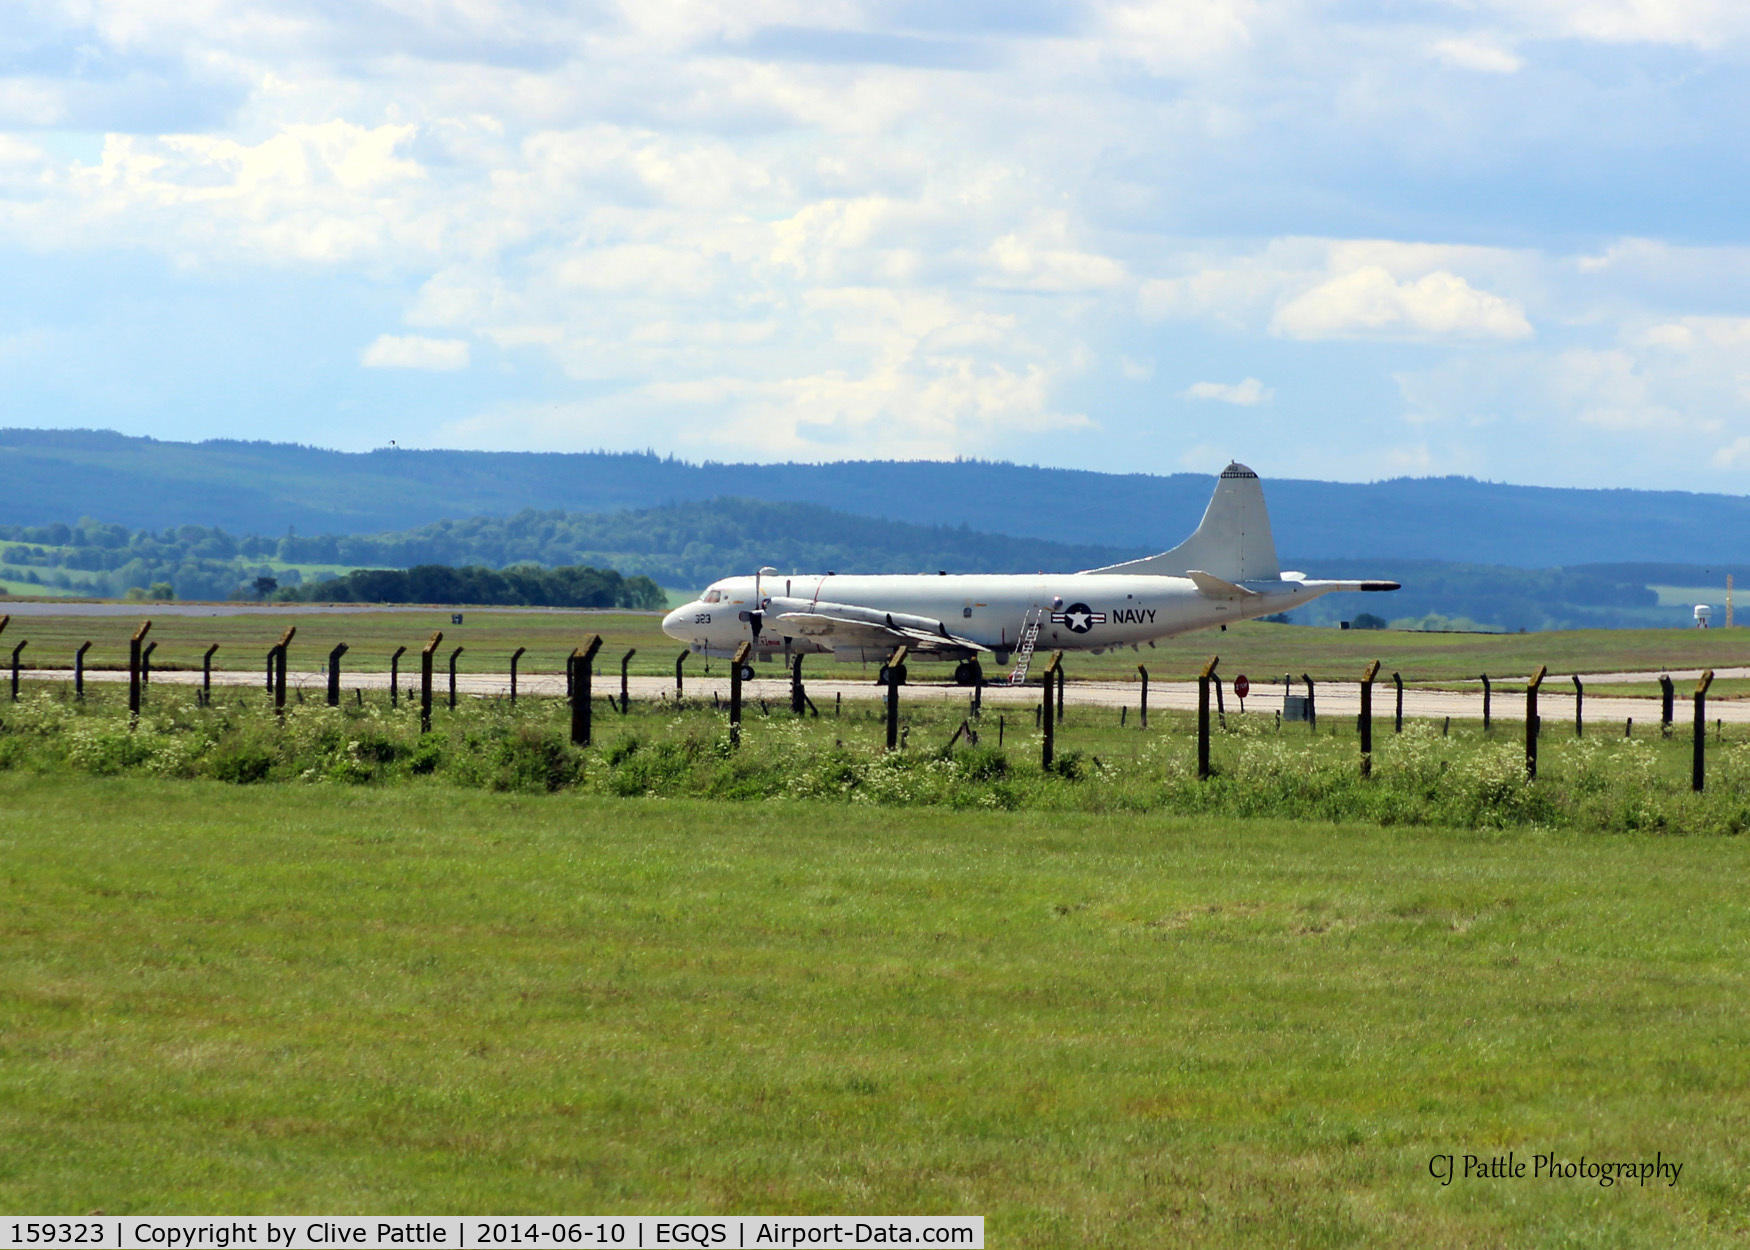 159323, 1974 Lockheed P-3C Orion C/N 285A-5613, Long distance shot at Lossie